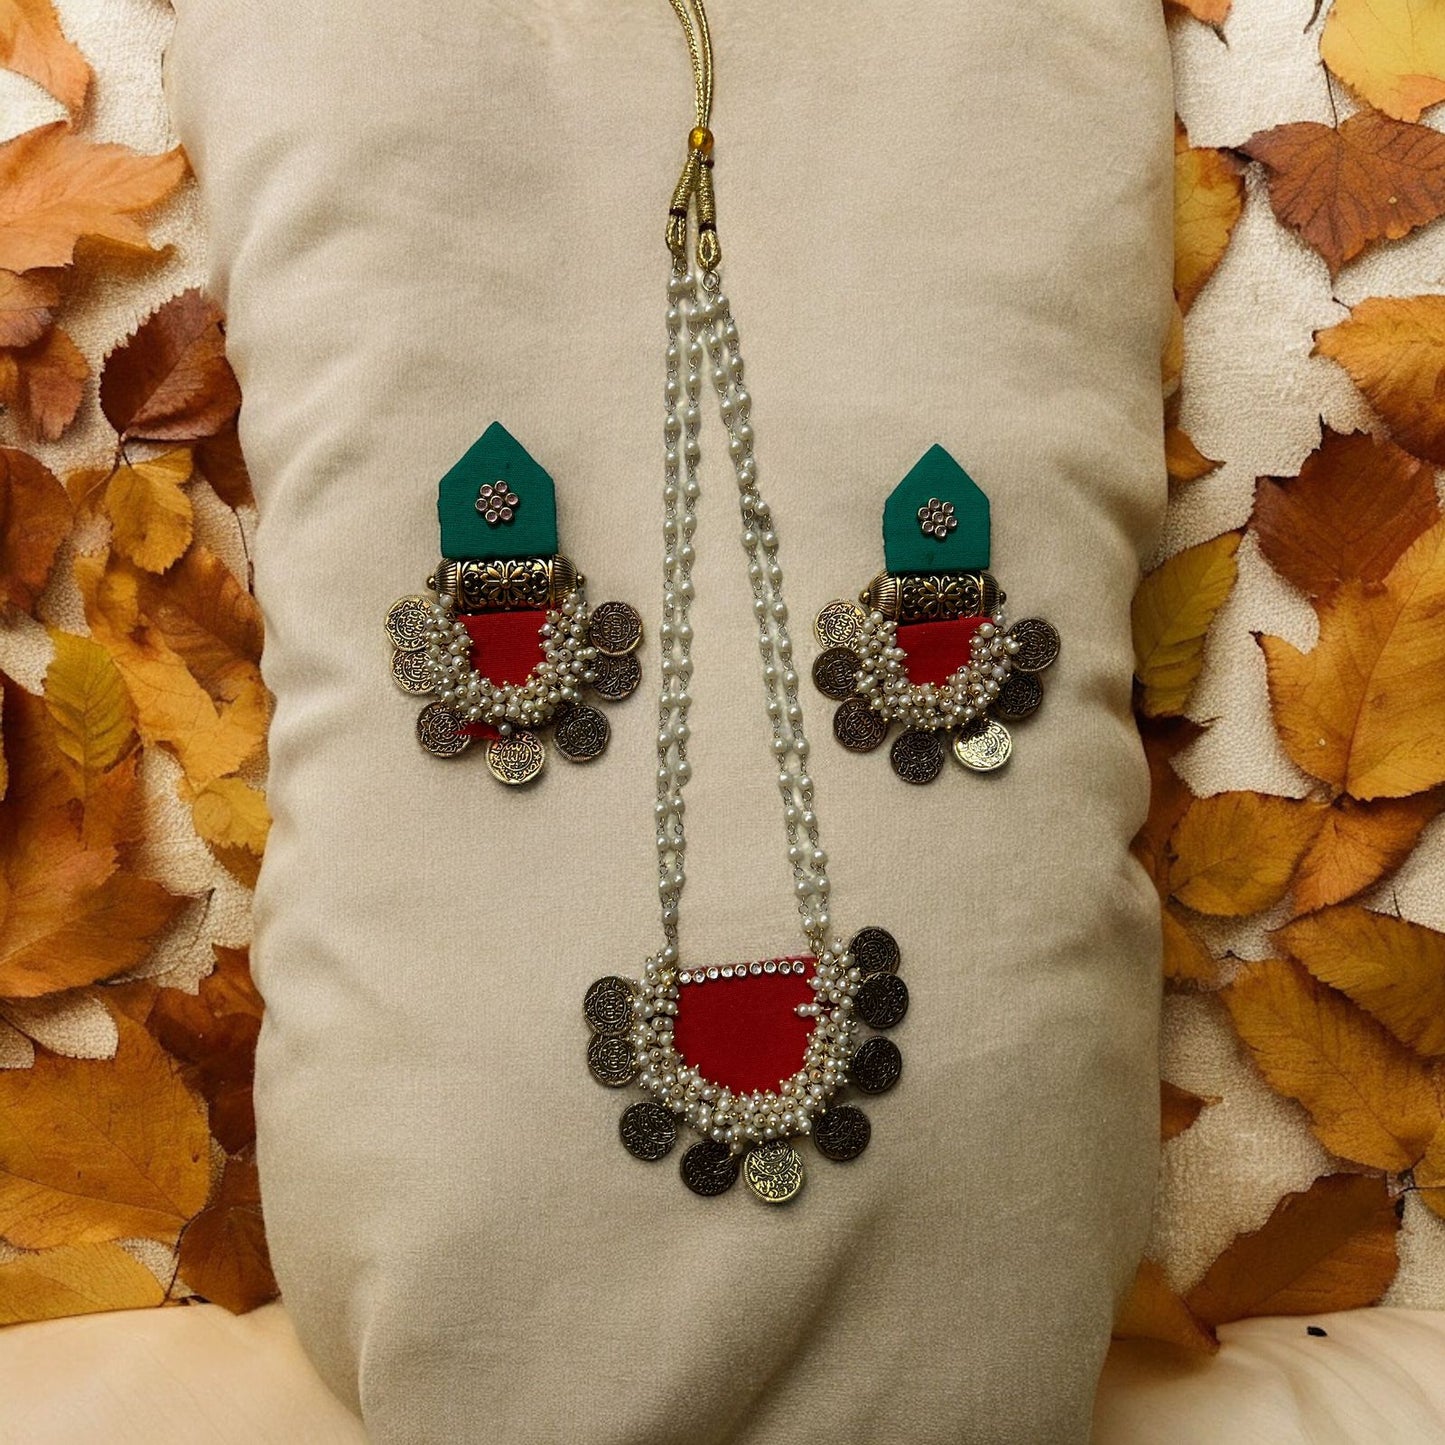 Ethinic jewelry set on fabric with accessories red and green